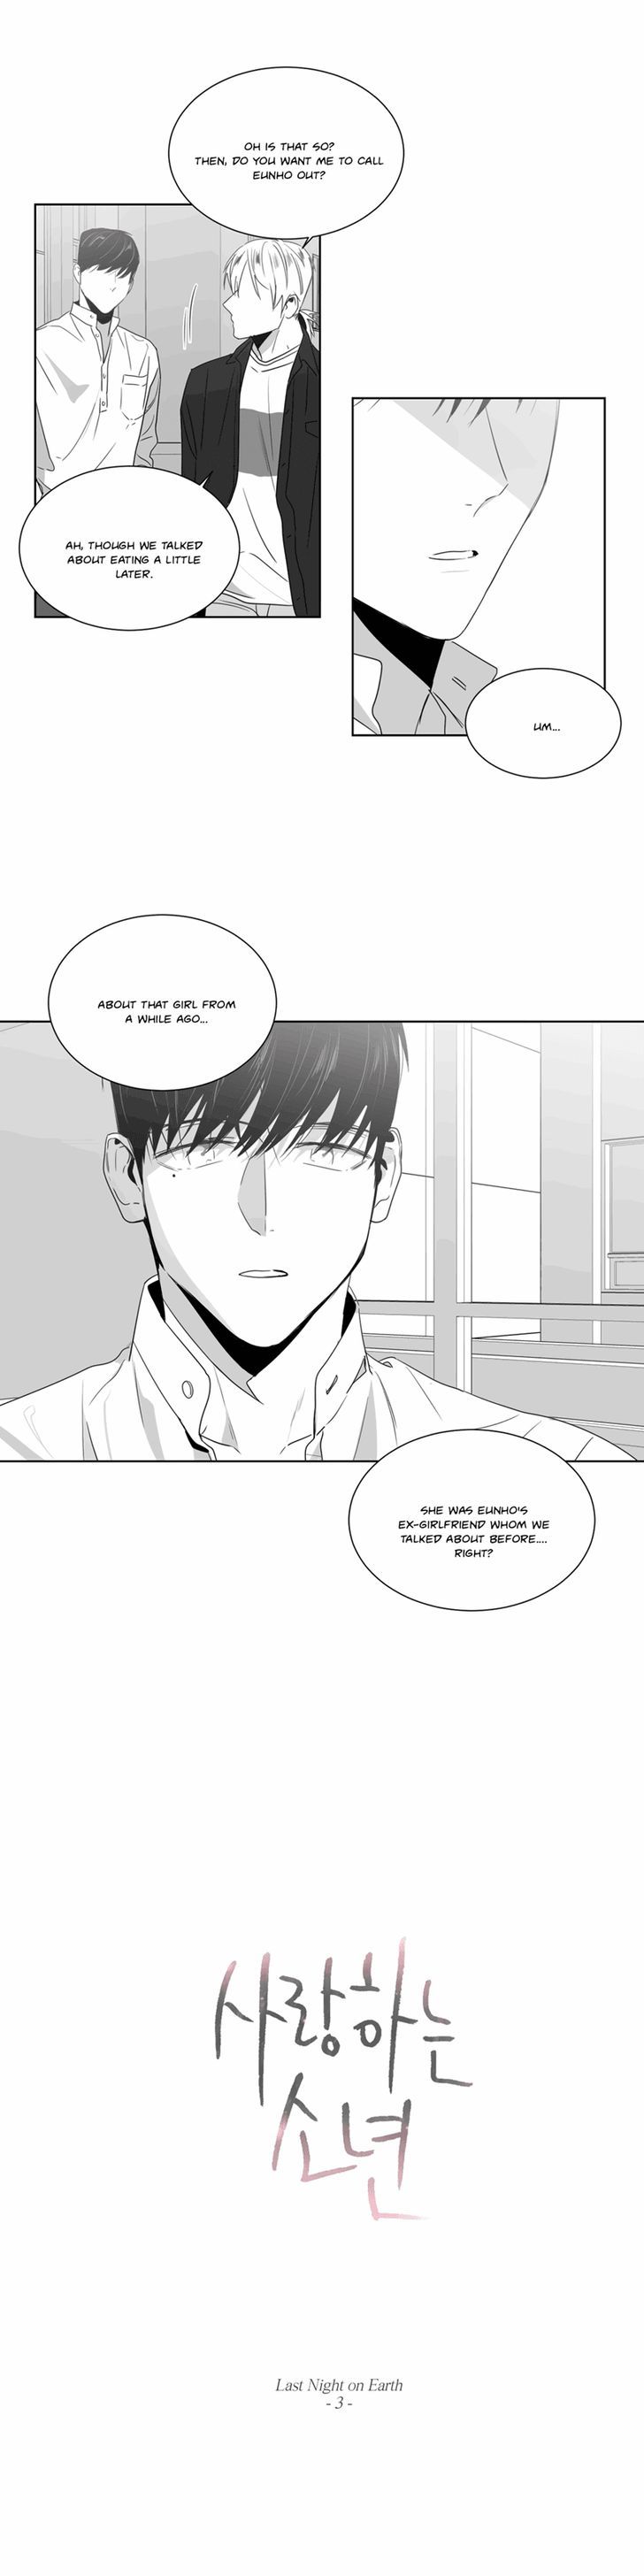 Lover Boy (Lezhin) Chapter 038 page 4